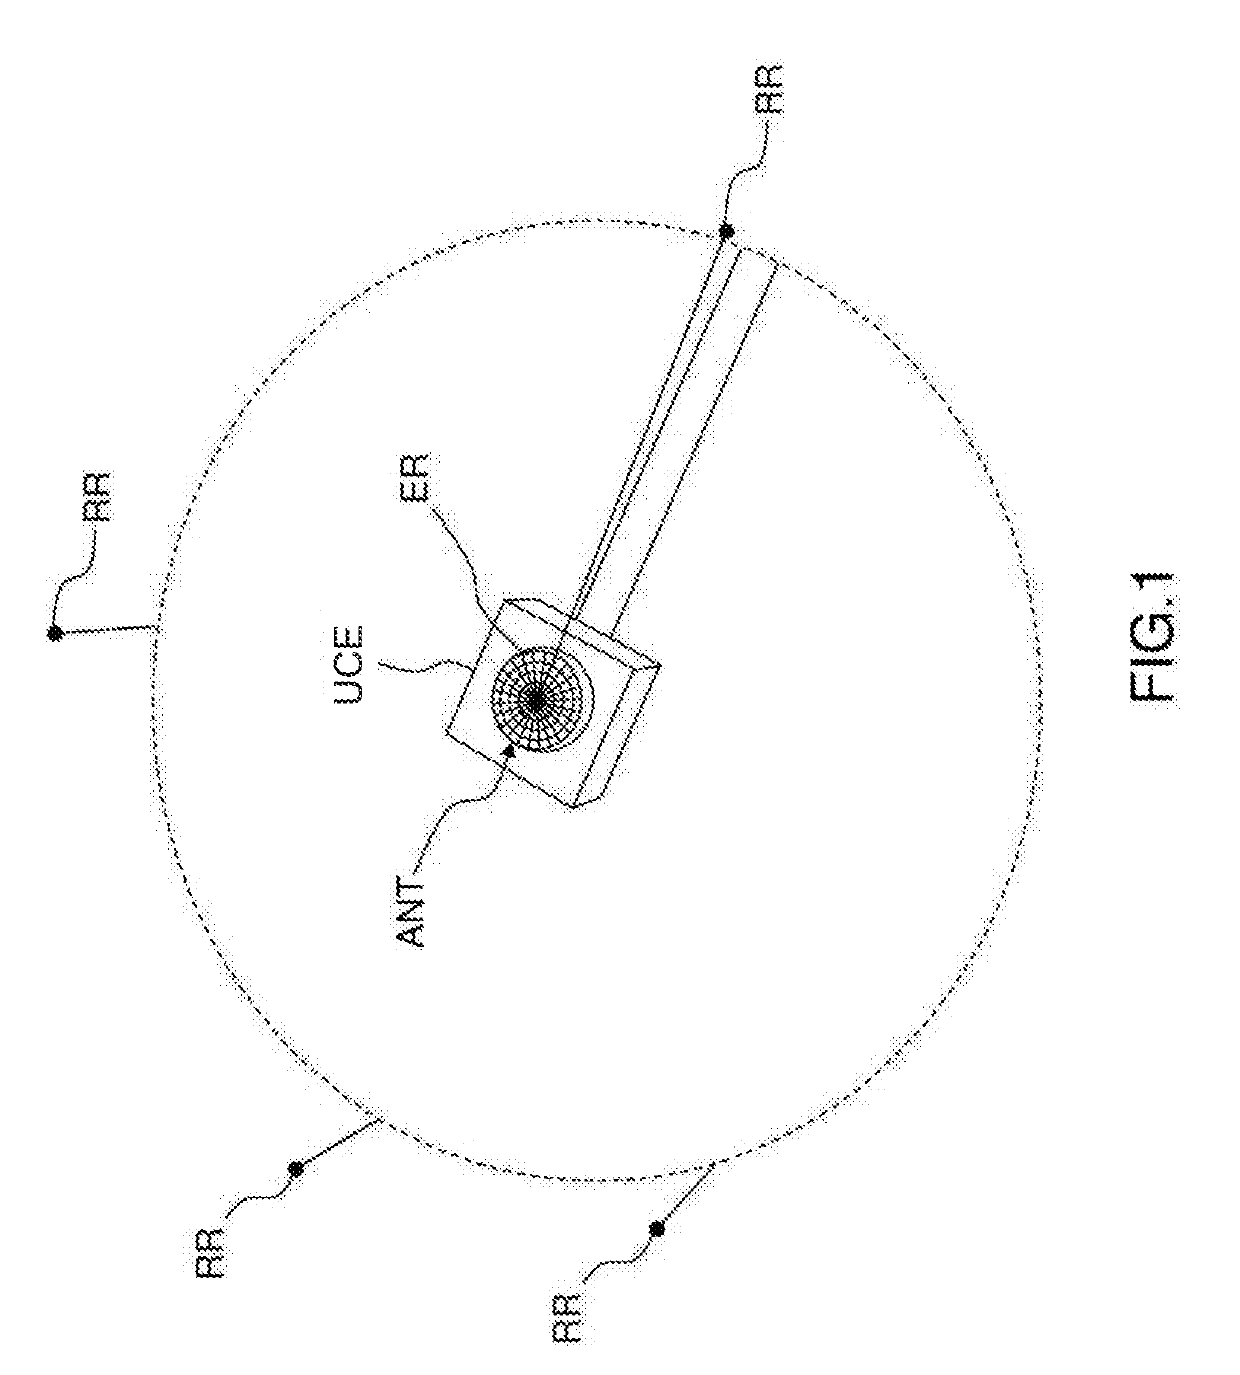 Method for determining a phase bias in the signal transmitted by at least one of the radiating elements of an active antenna, and associated device